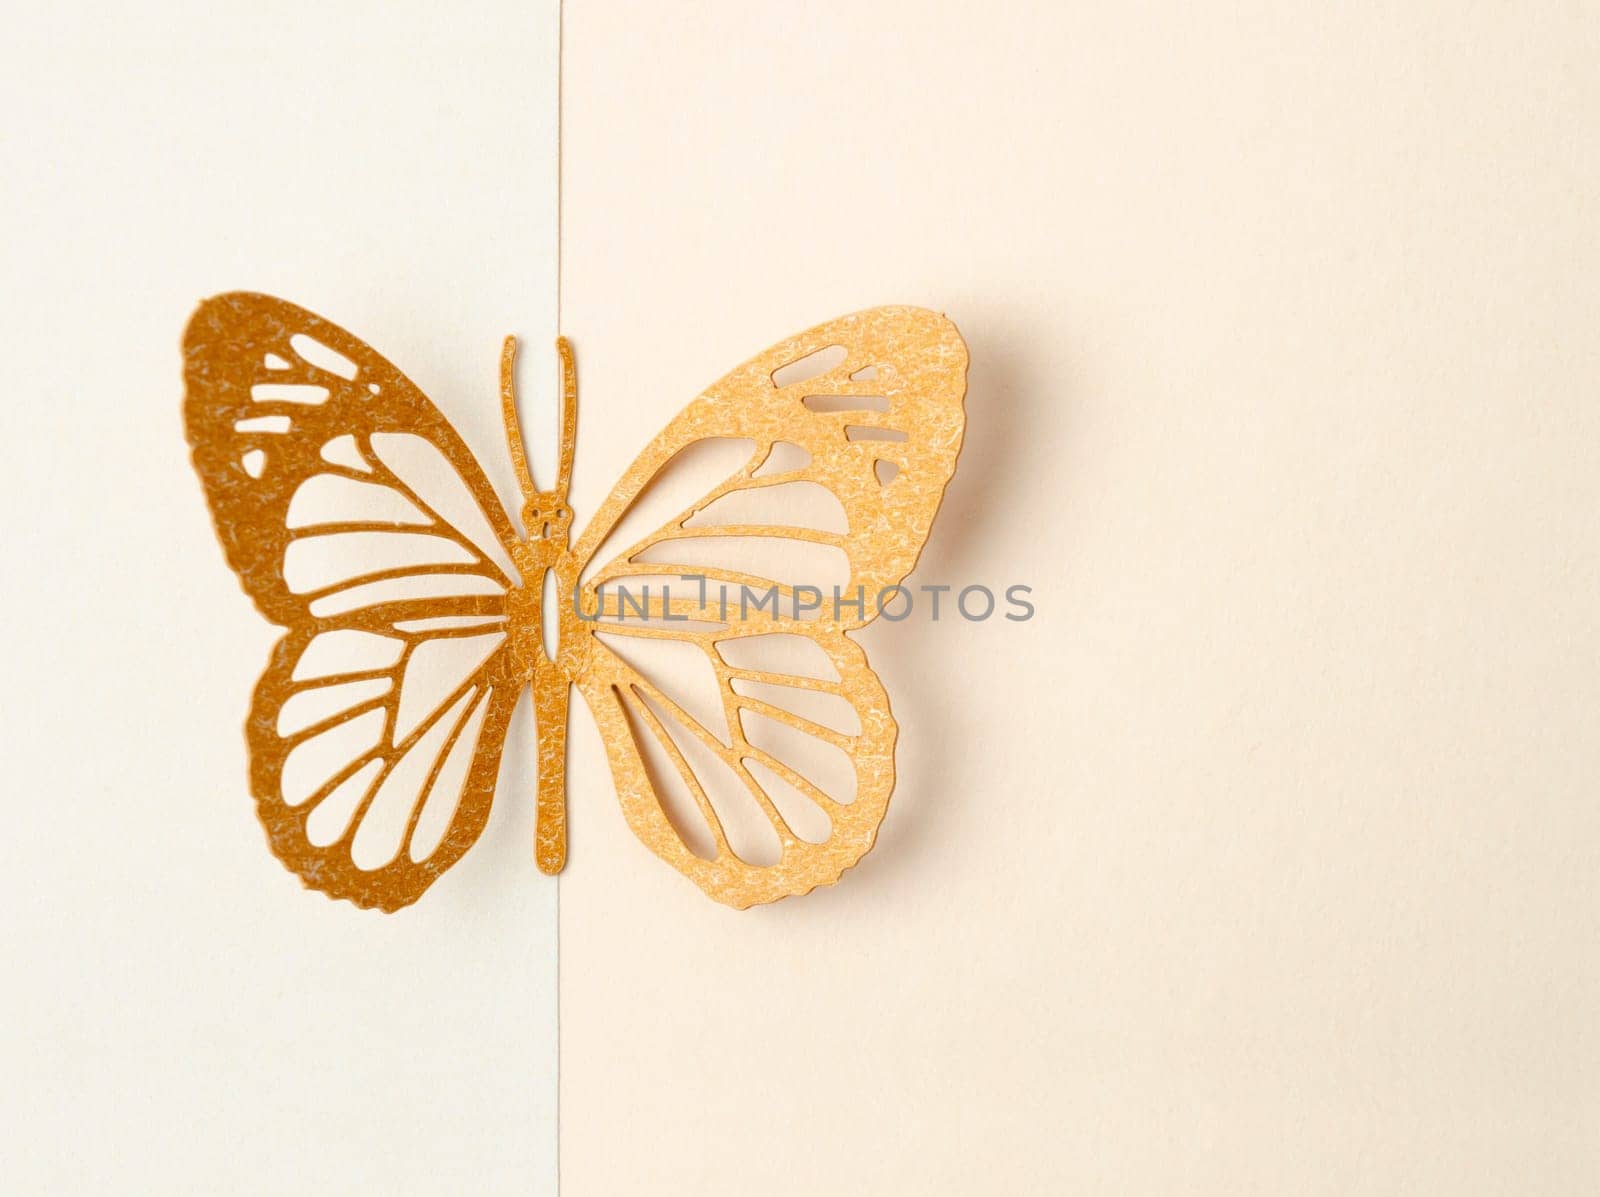 Butterfly made from carve paper or cutting on yellow background with empty space for your text or message.